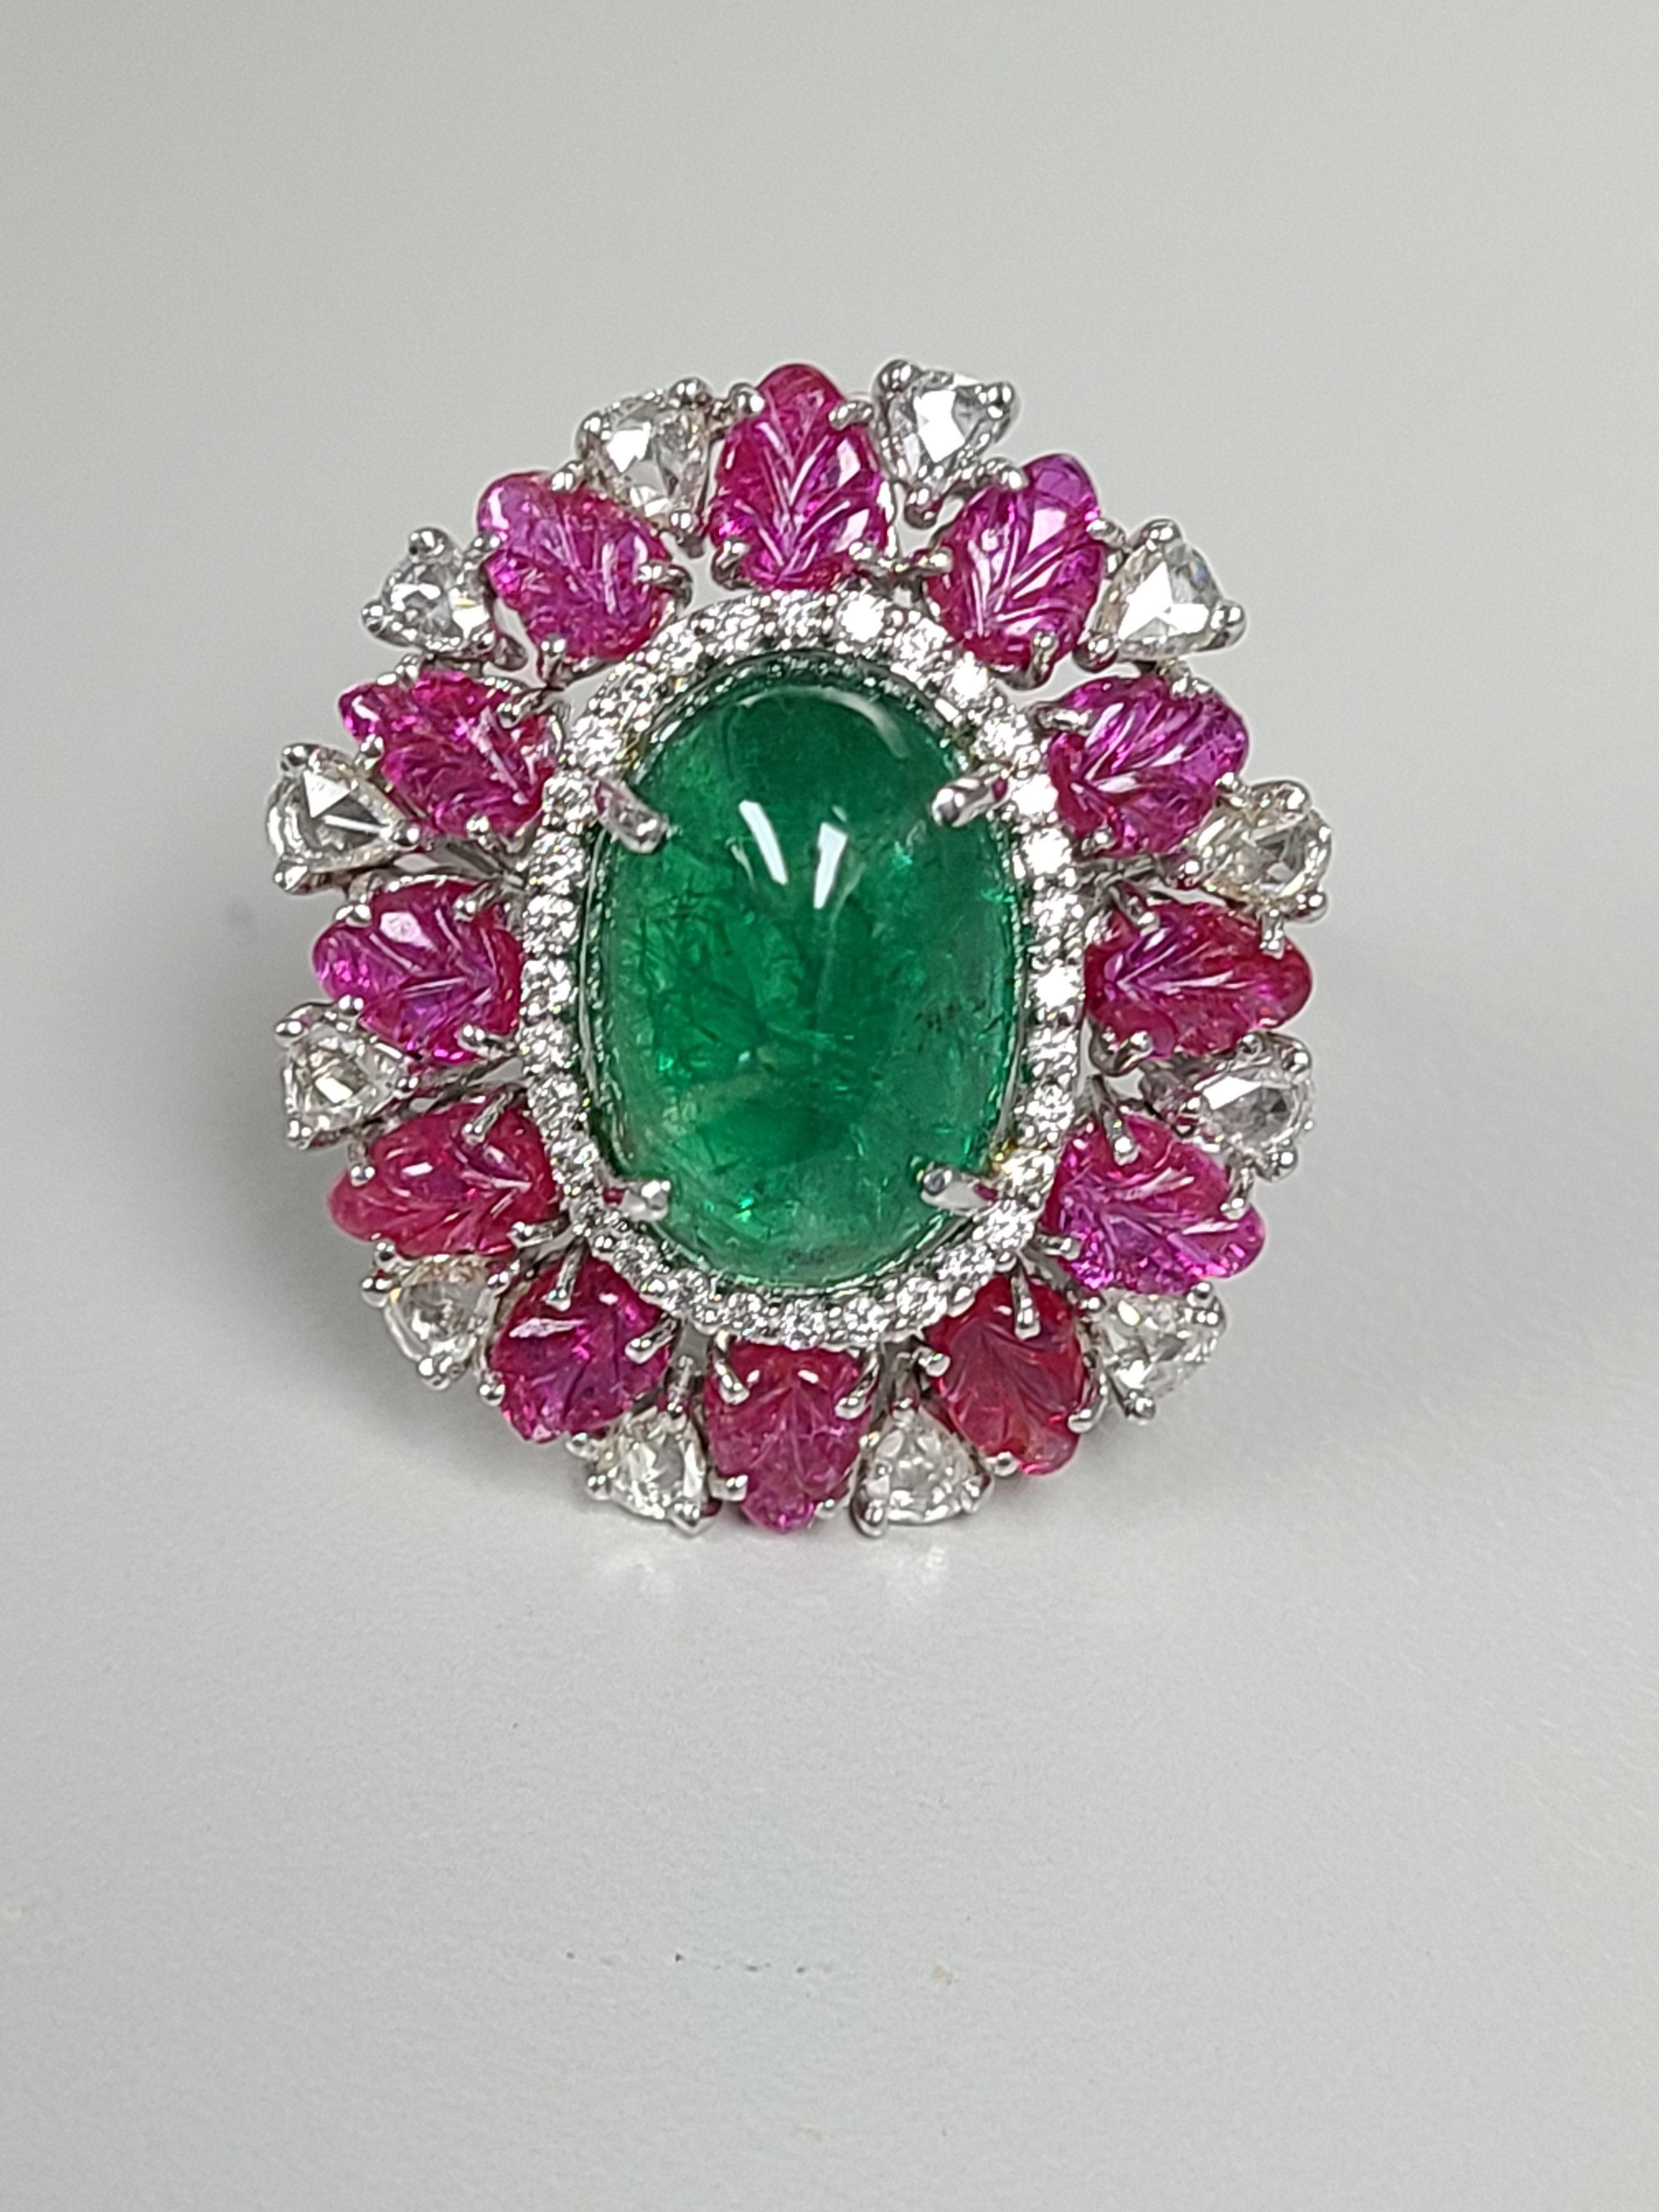 modern and chic ring made in 18k white gold , natural emerald cabochon from zambia weighing 6.82 carats , unheat ruby leaves weighing 3.83 carats and diamonds weighing 1.05 carats . ring dimensions in cm 2.5 x 2 x 3 ( L X W X H)